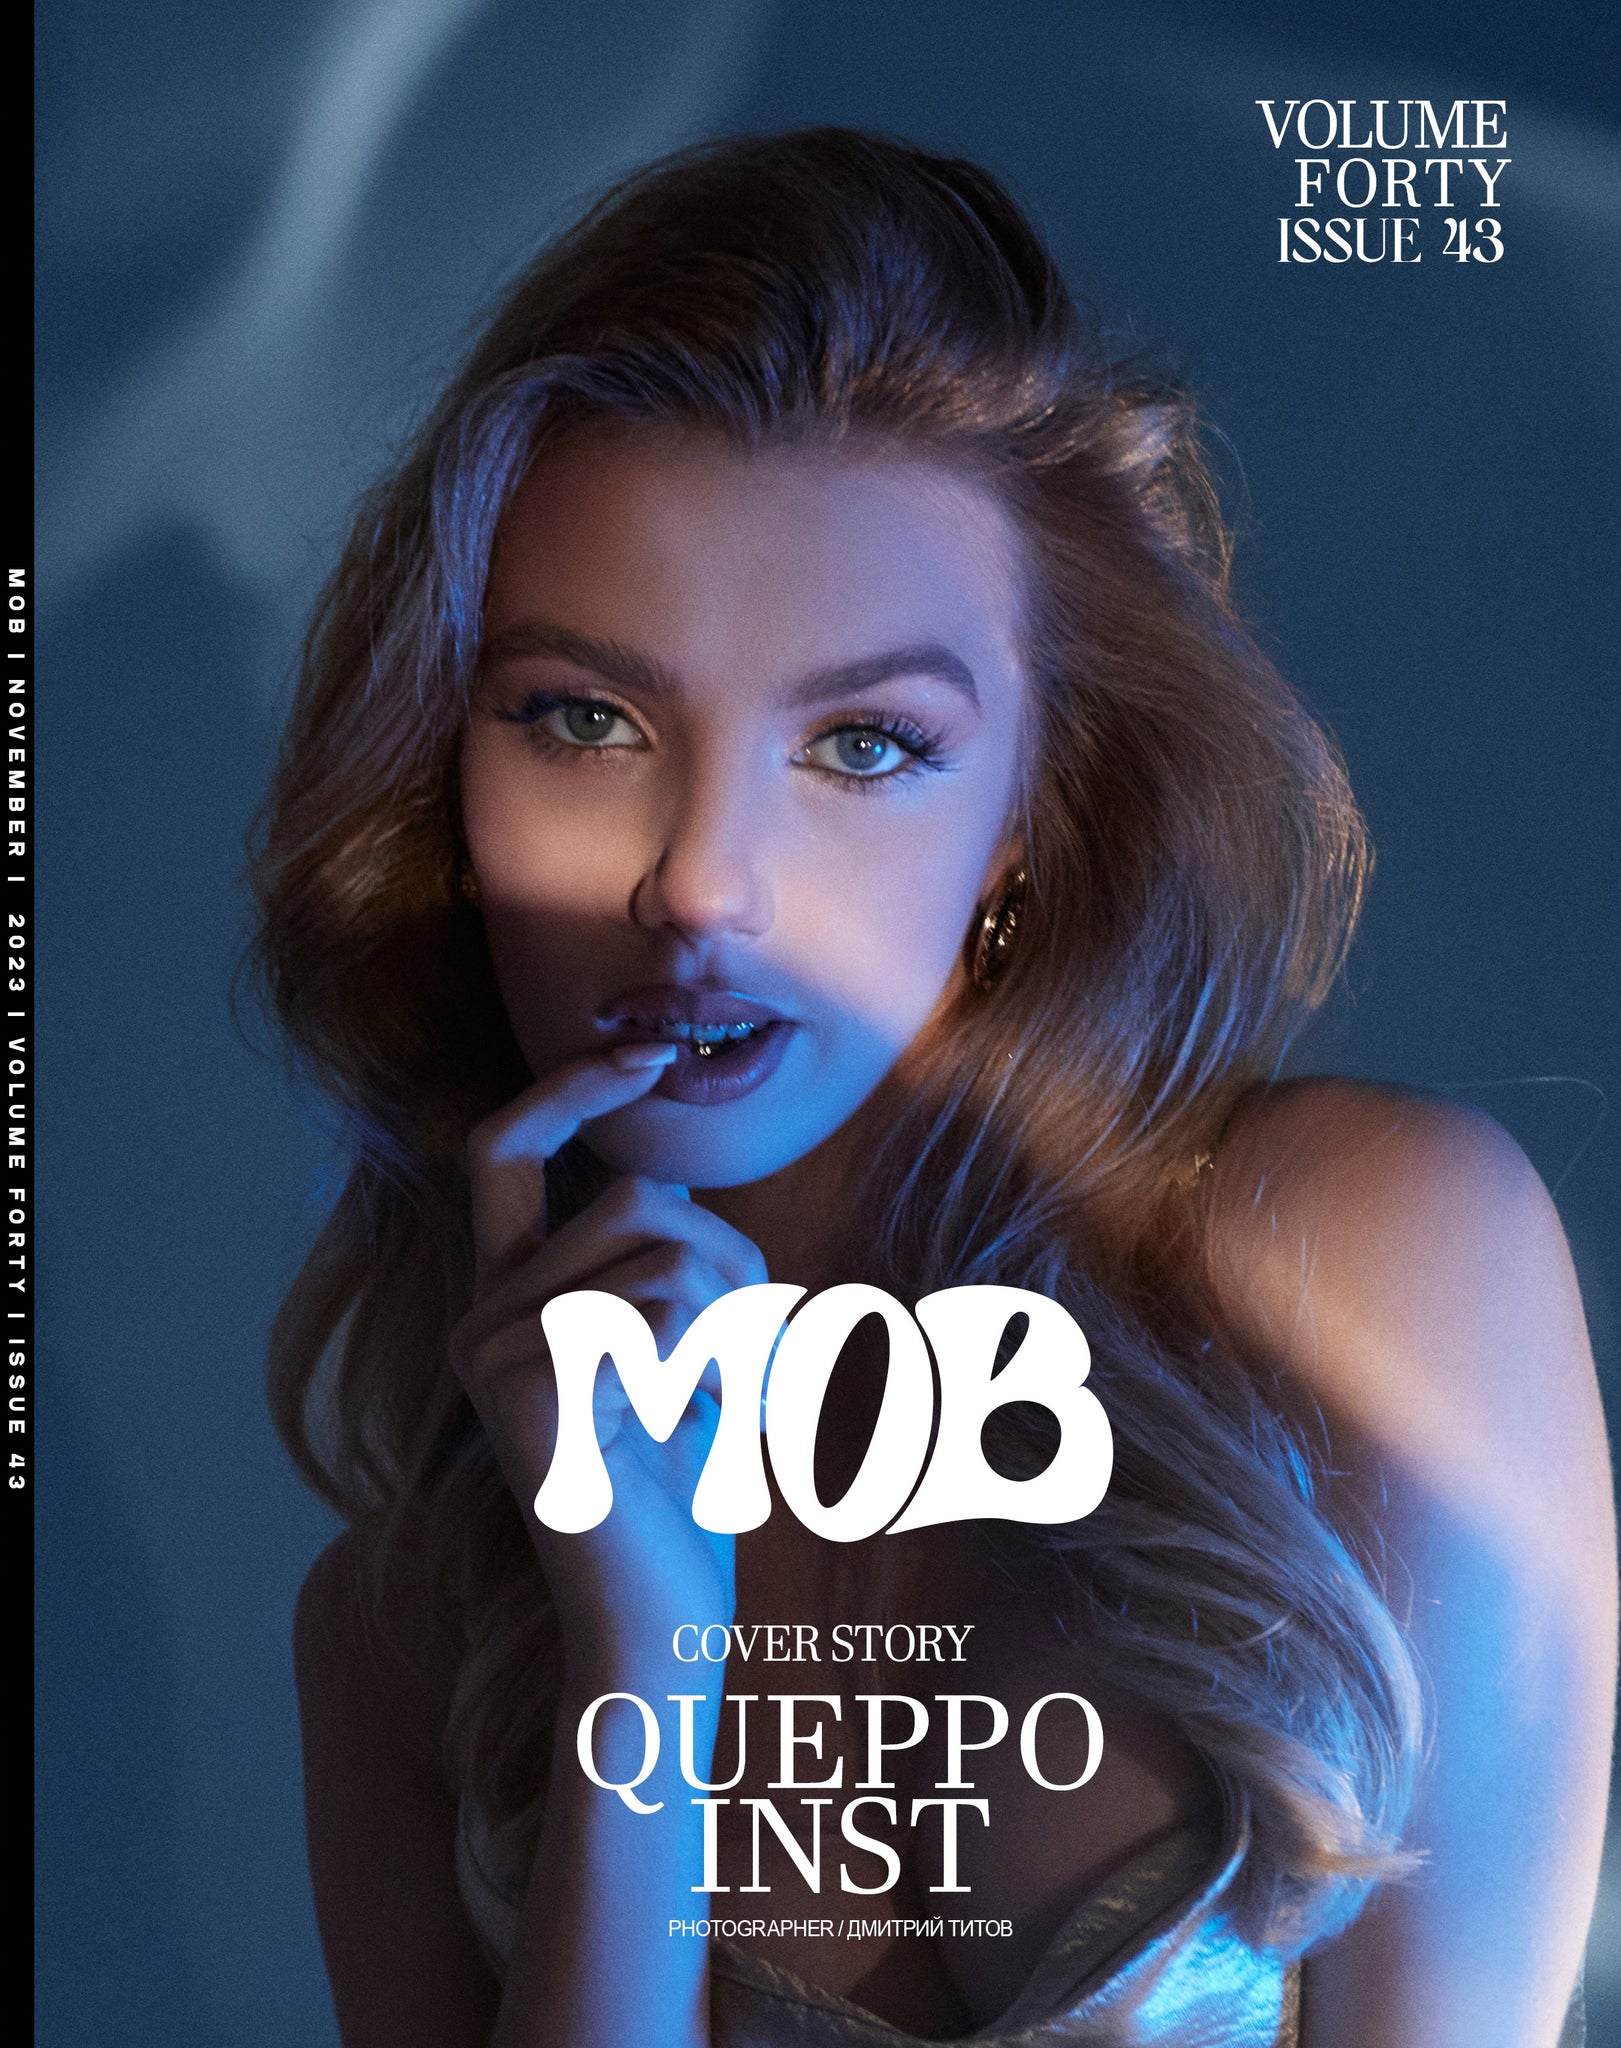 MOB JOURNAL | VOLUME FORTY | ISSUE #43